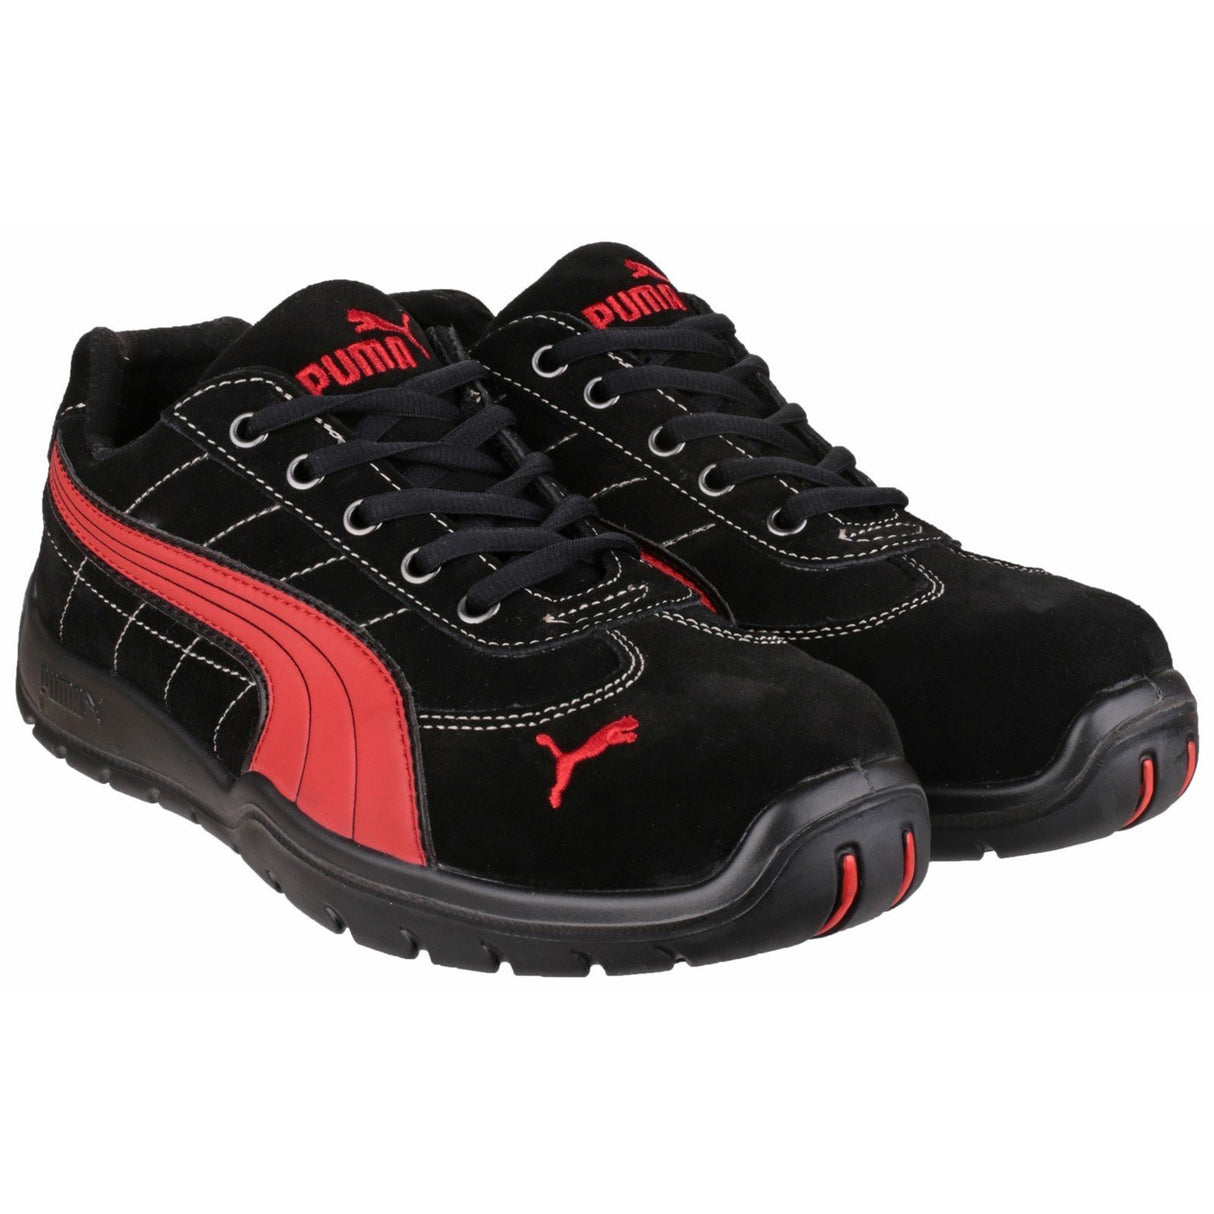 Puma Safety Silverstone Low Safety Trainers